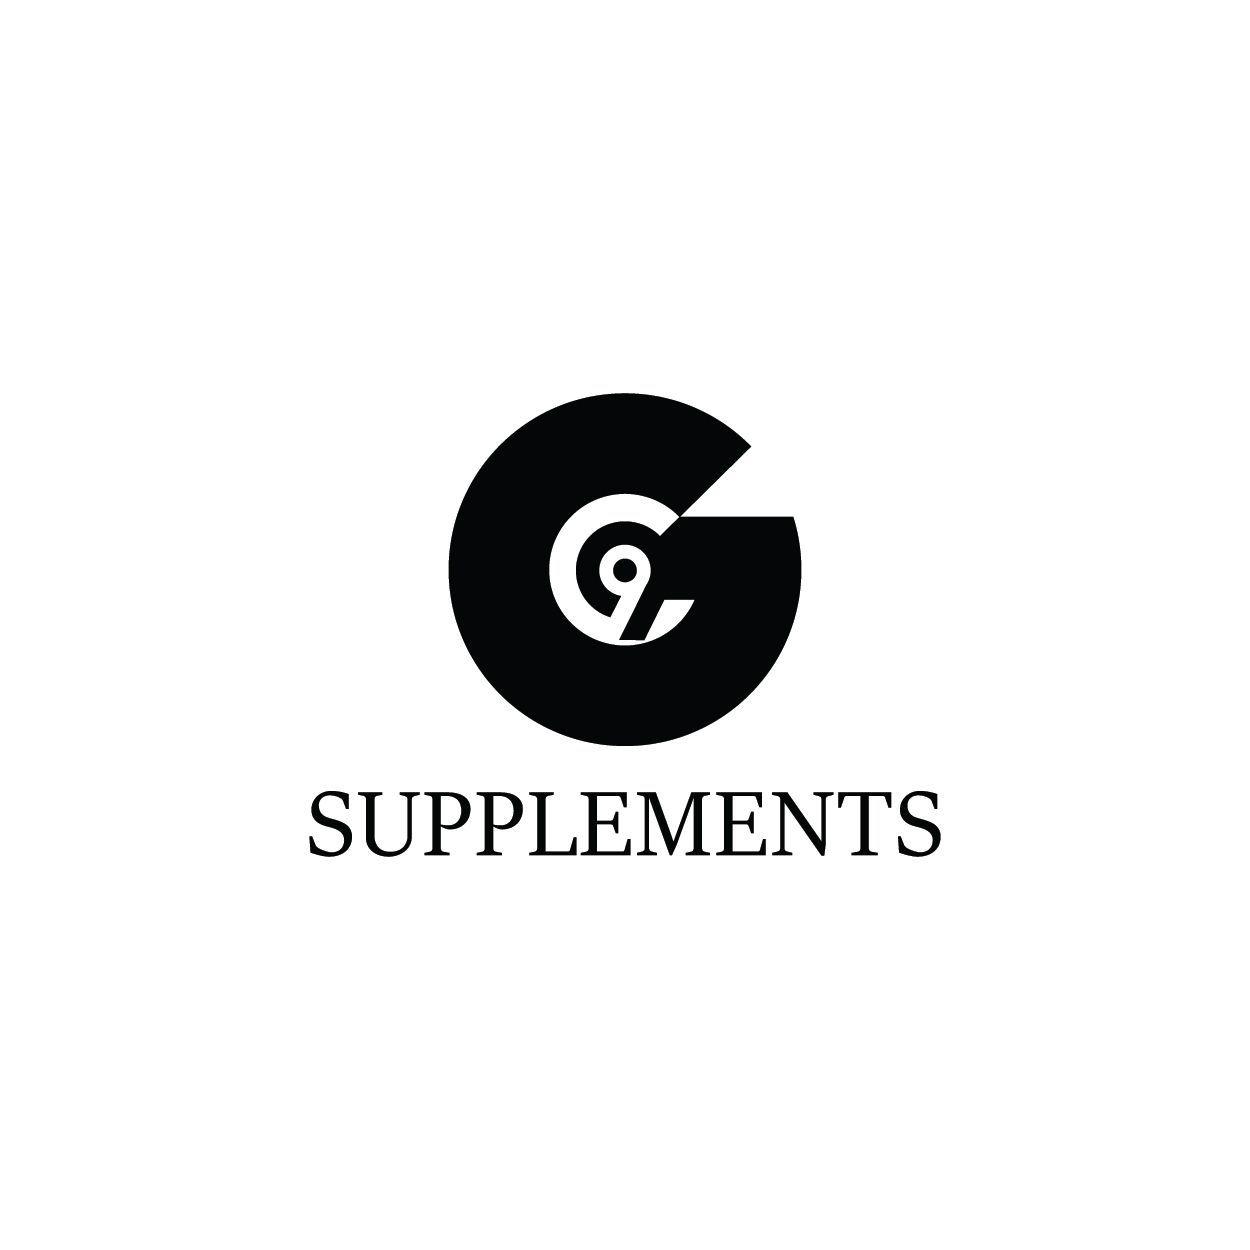 Supplement Company Logo - G9 supplement company logo. Projects to try. Company logo